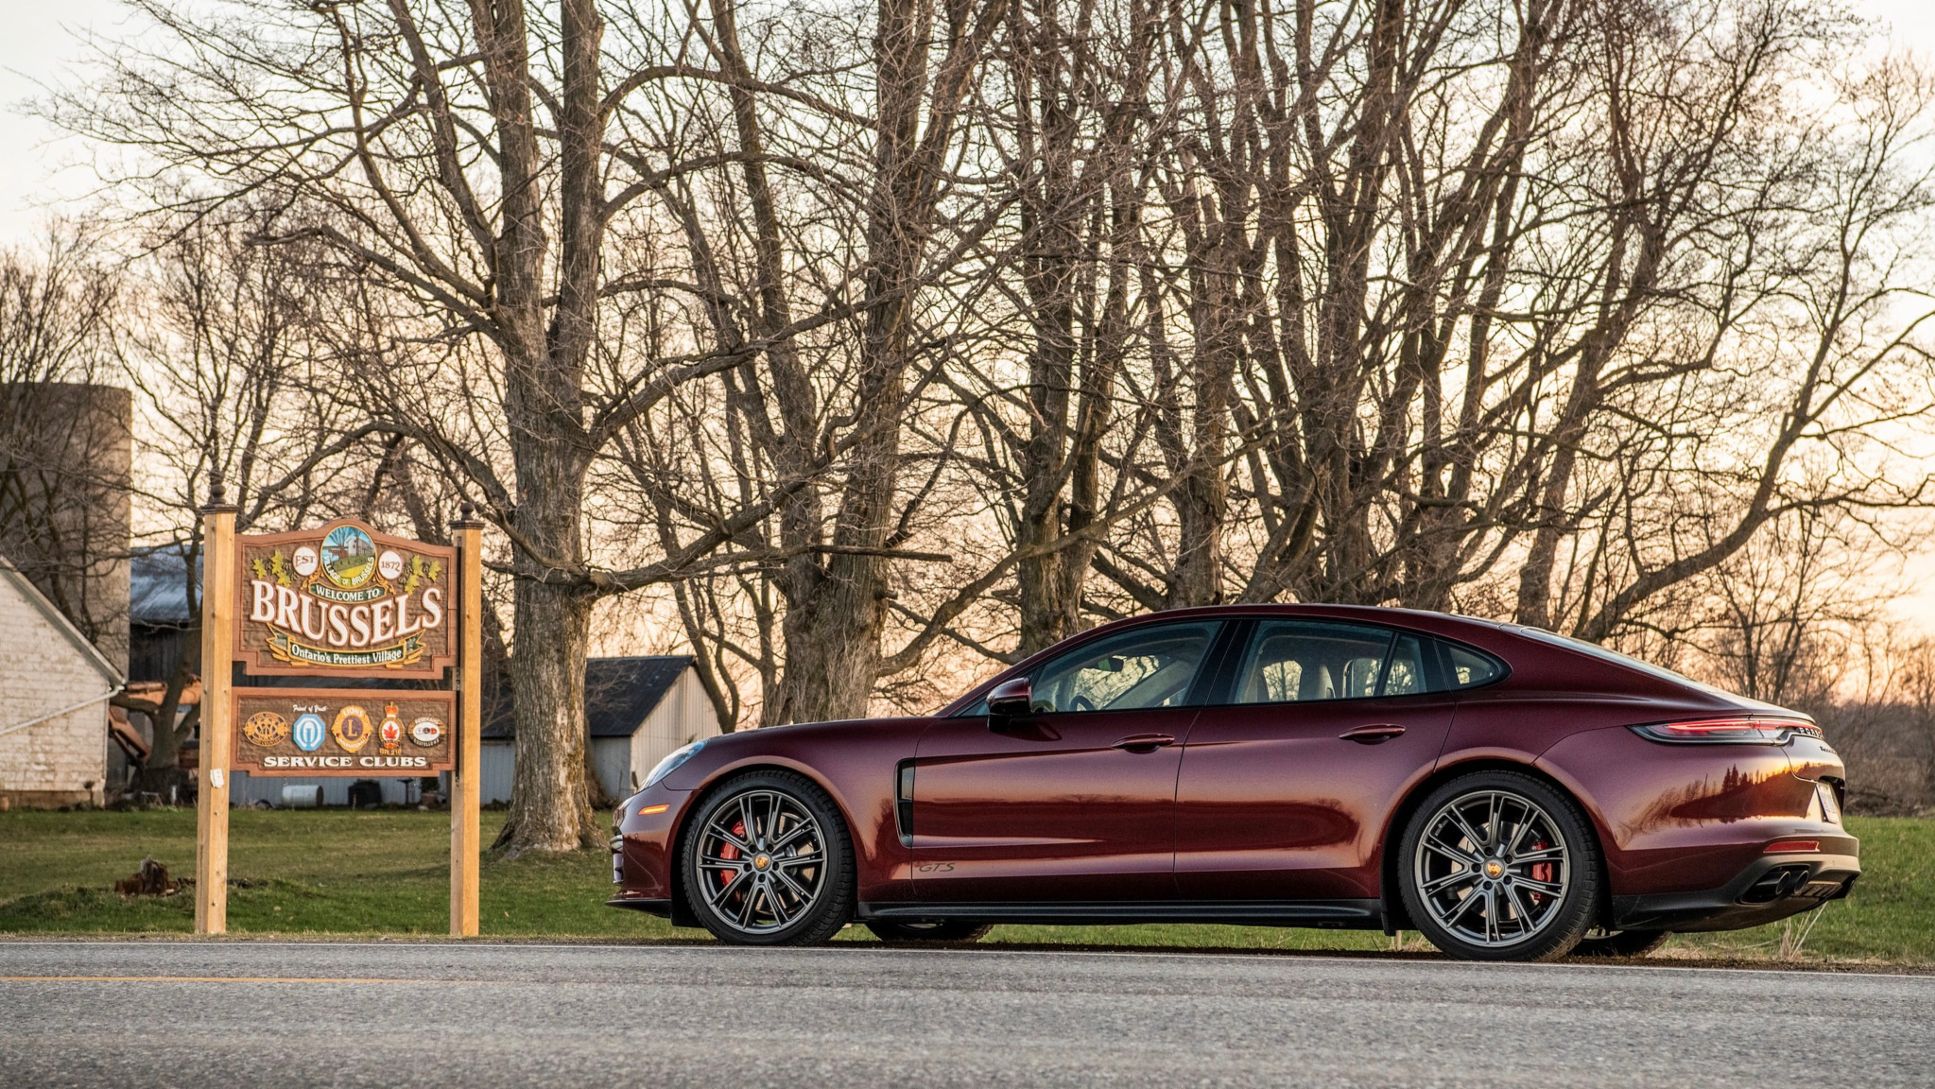 Panamera GTS, Brussels, Southern Ontario, Canada, 2021, Porsche AG